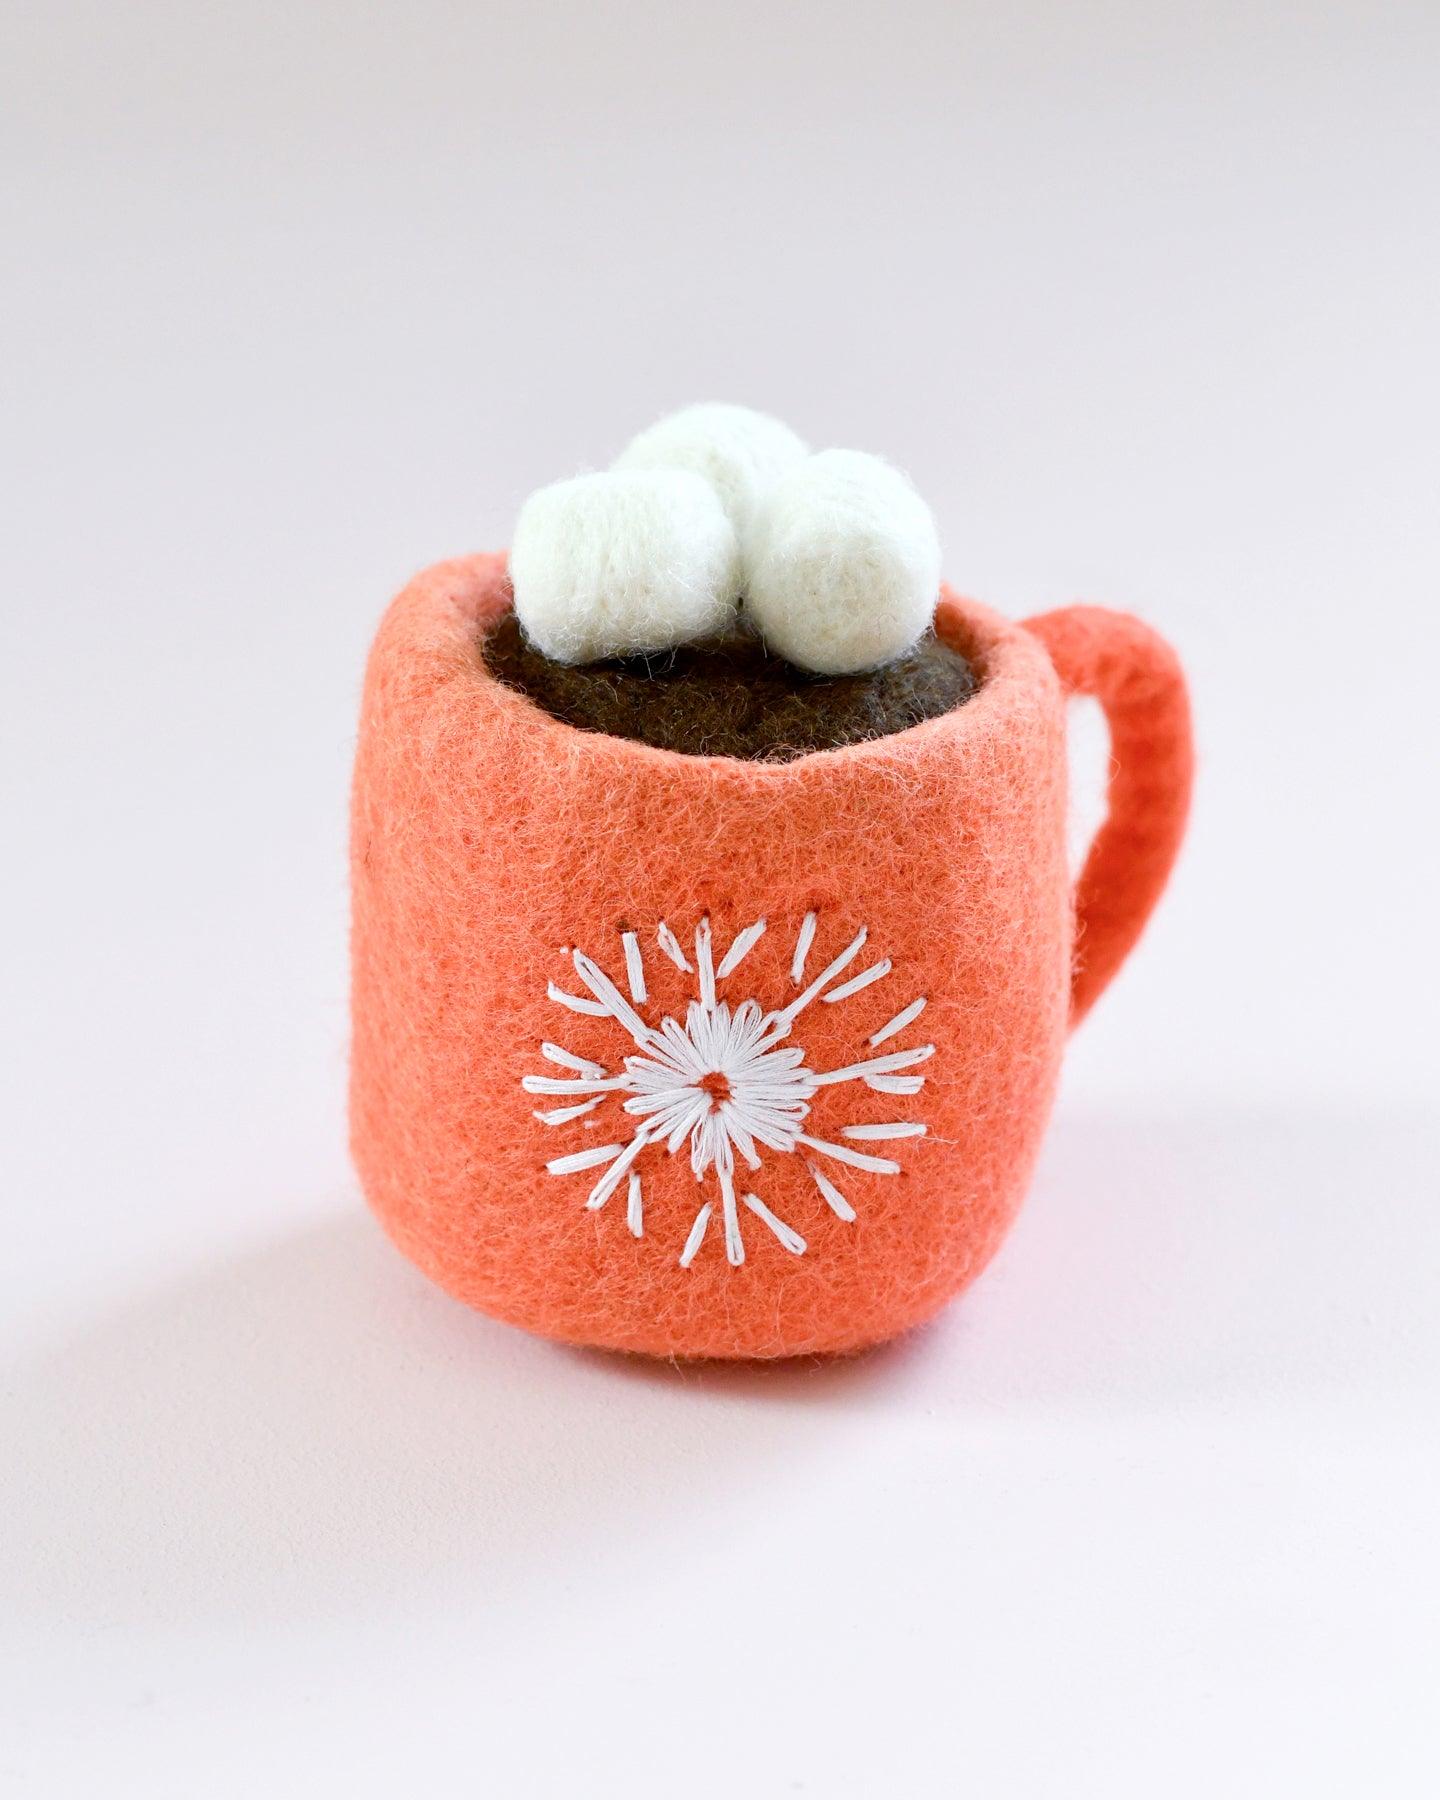 Felt Hot Chocolate Cacao with Marshmallows (Red Cup) - Tara Treasures